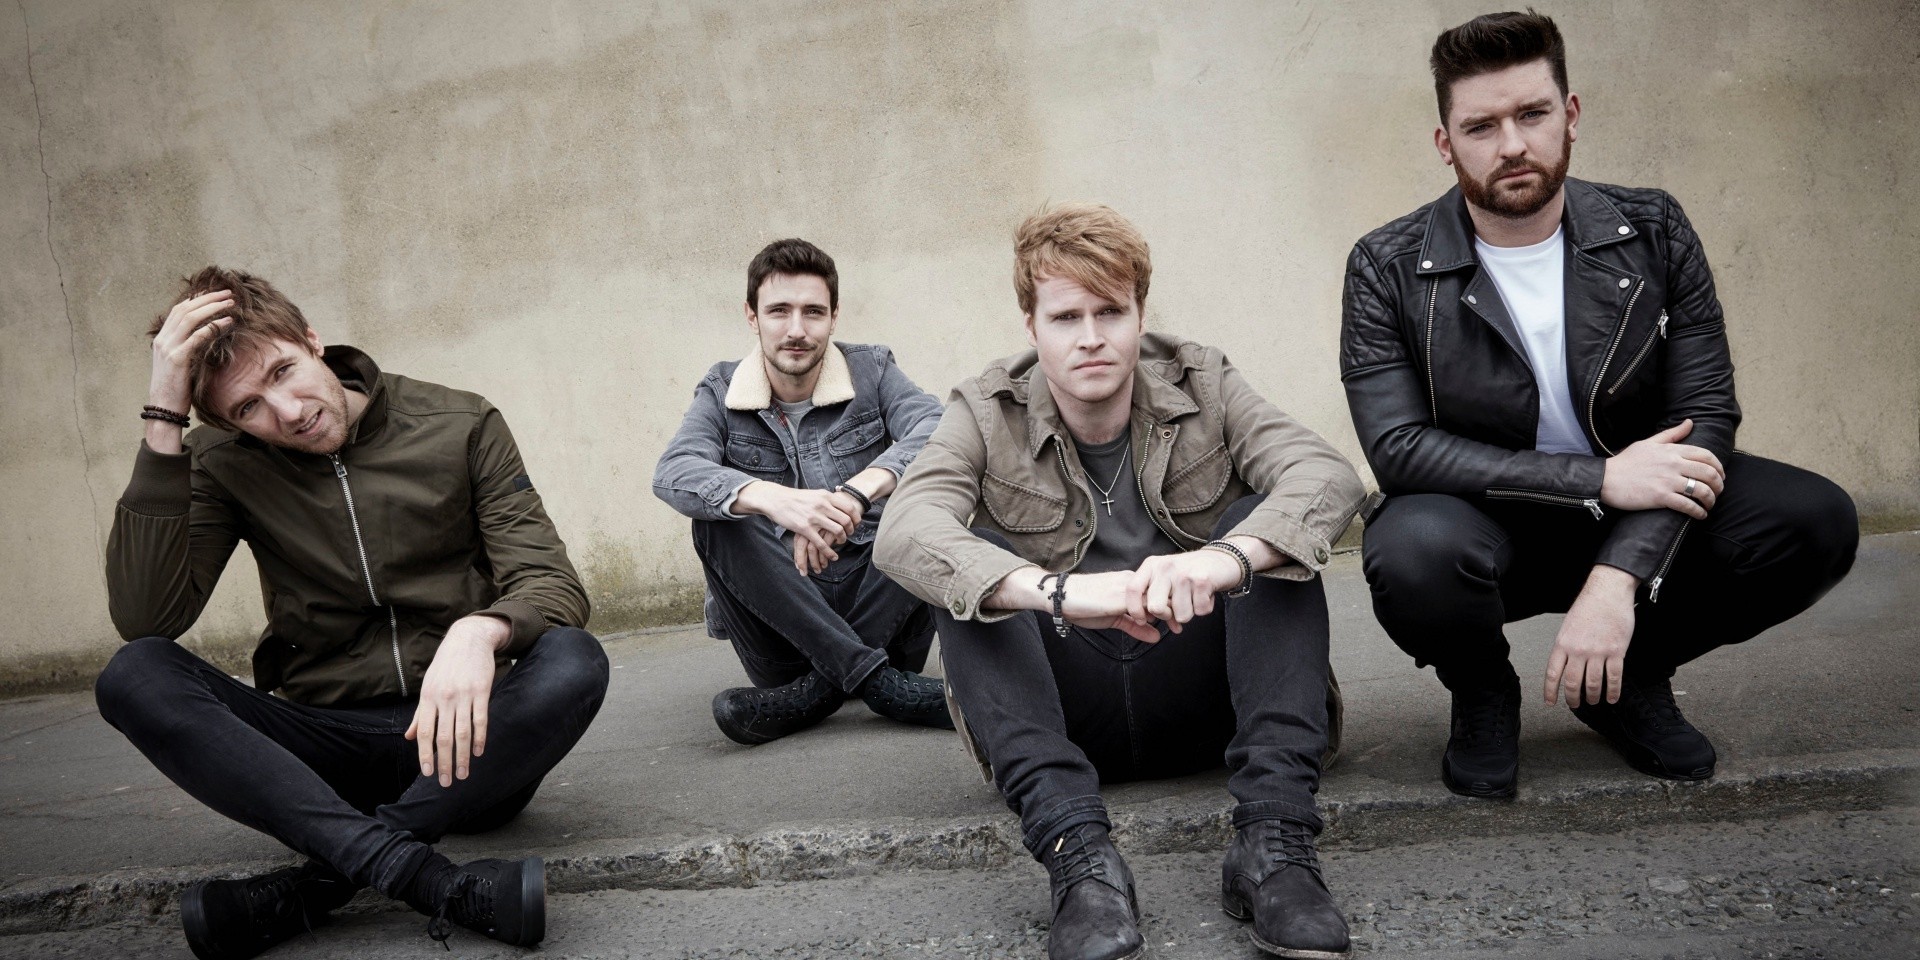 "We're hoping that our audience is able to stay and develop with us": An interview with Kodaline